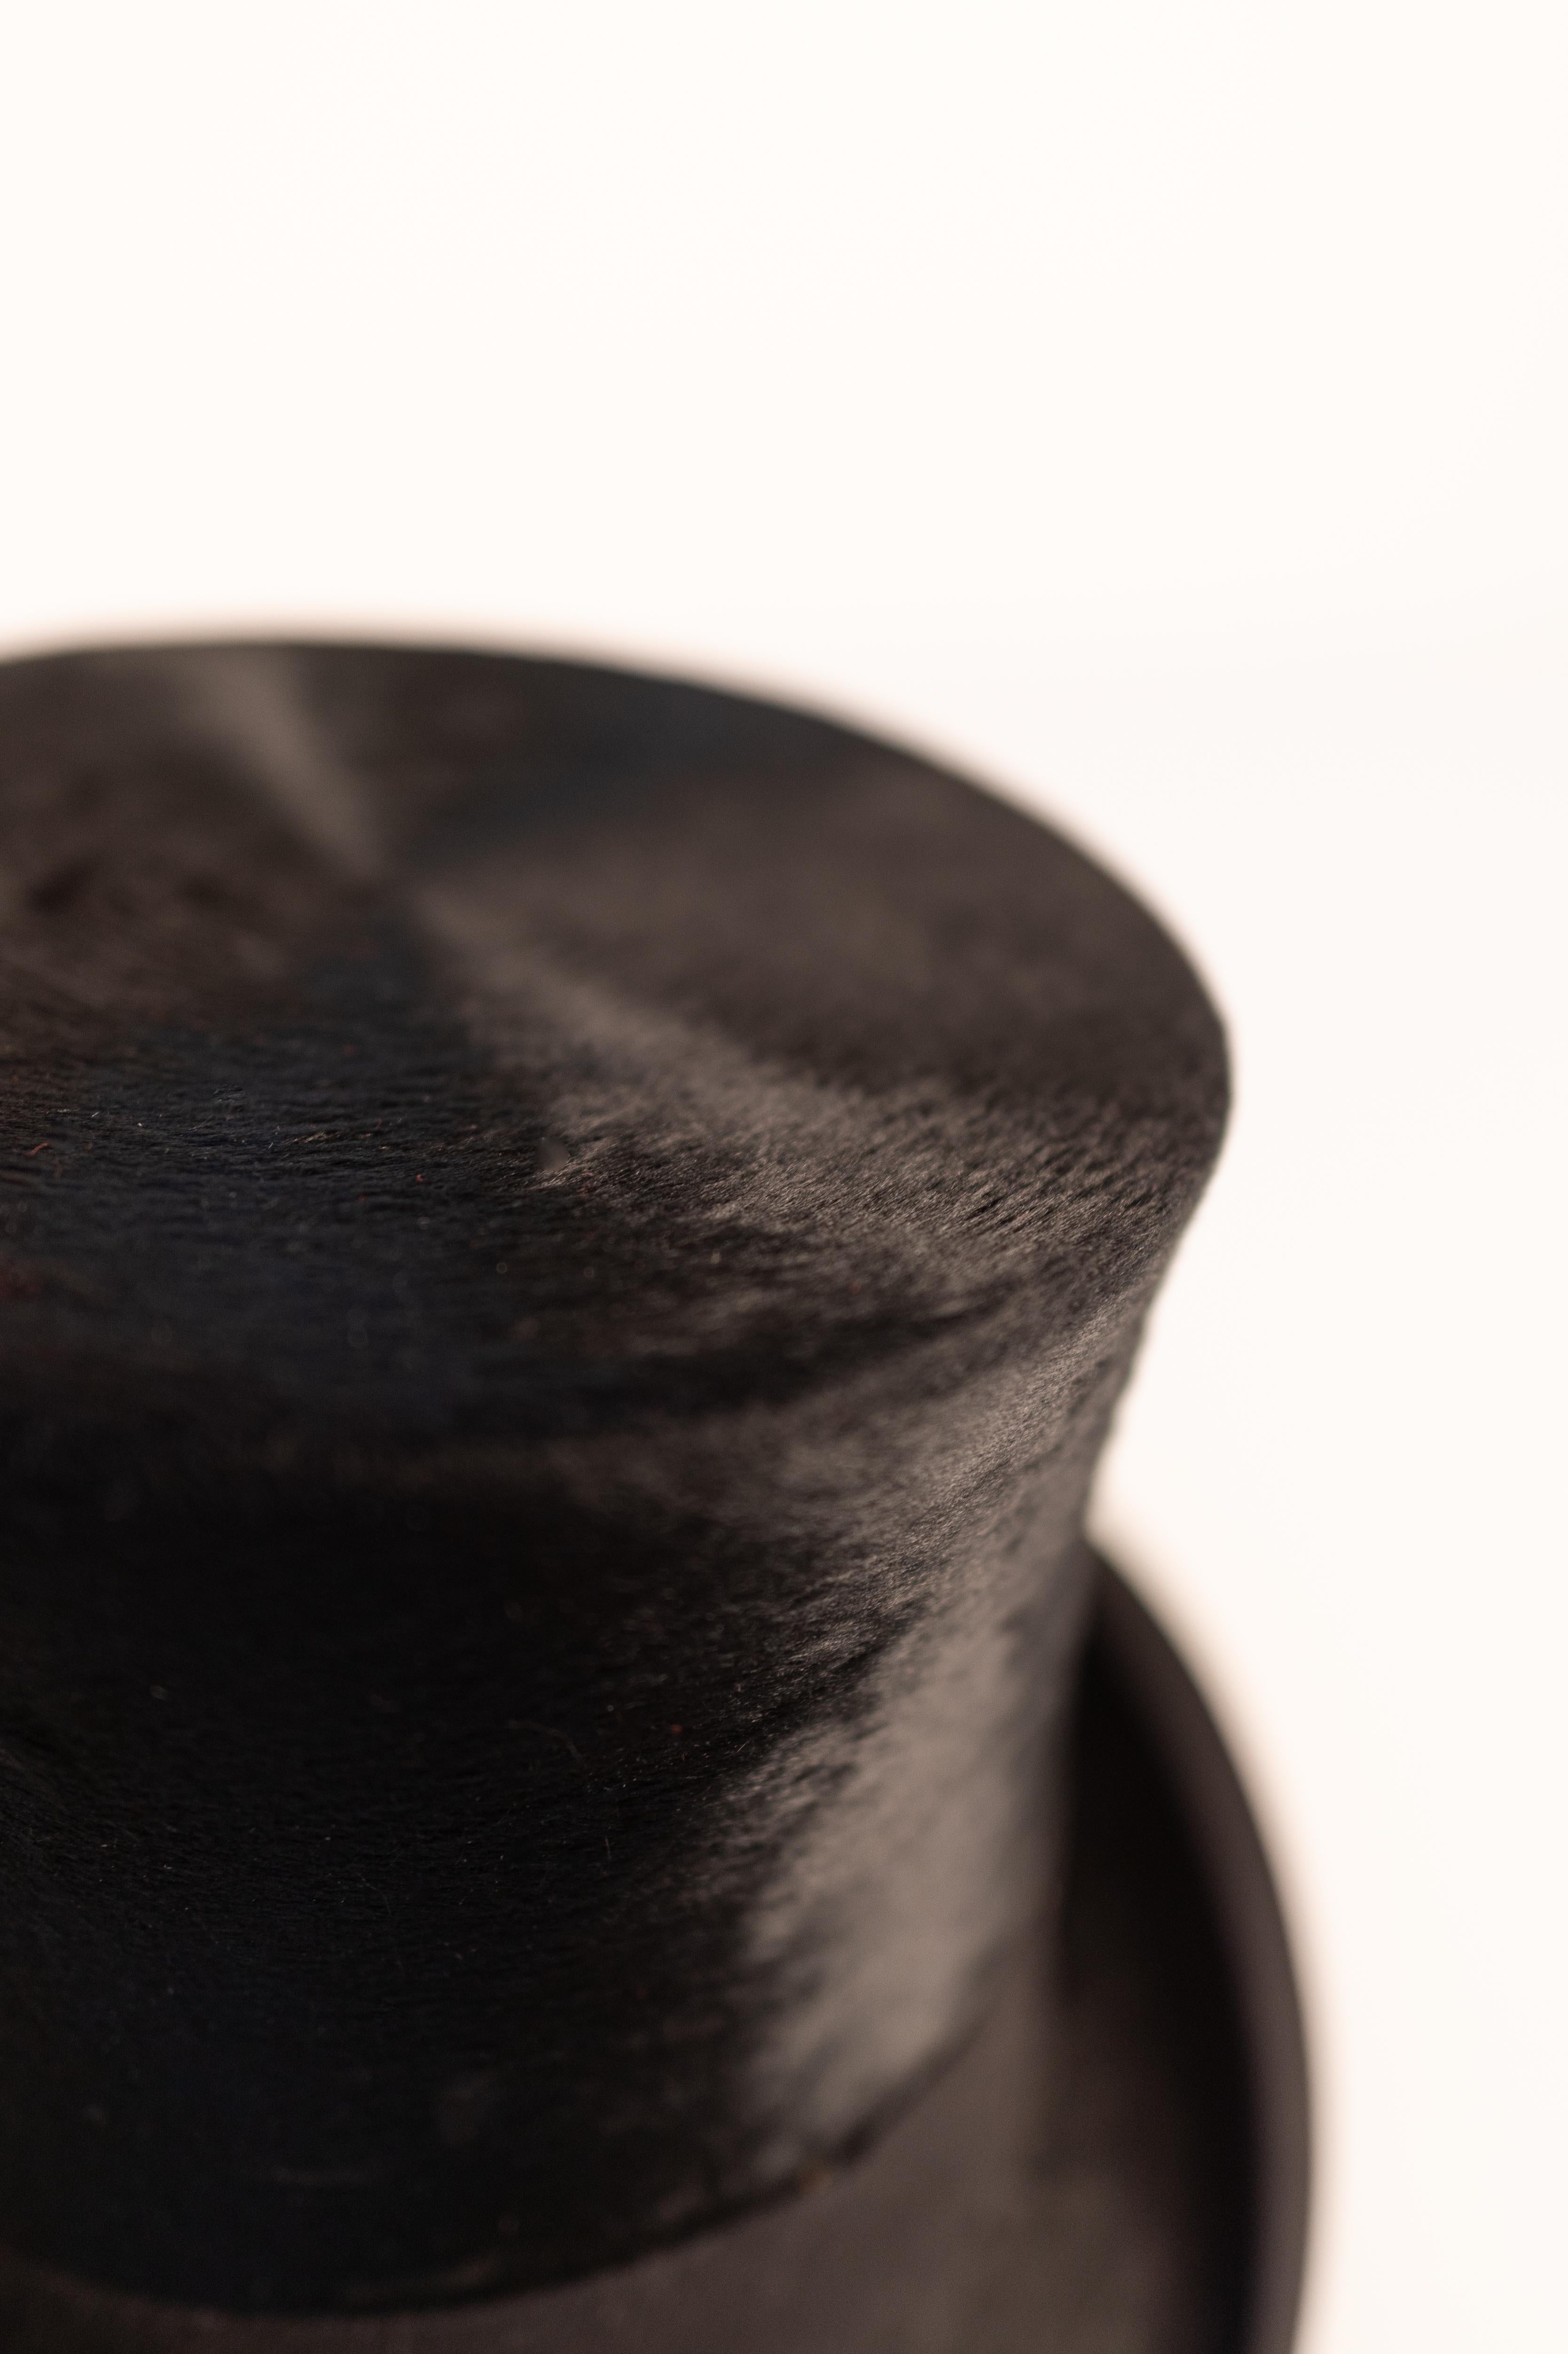 Victorian Moleskin top hat, with leather hatbox (late 19th - early 20th century) For Sale